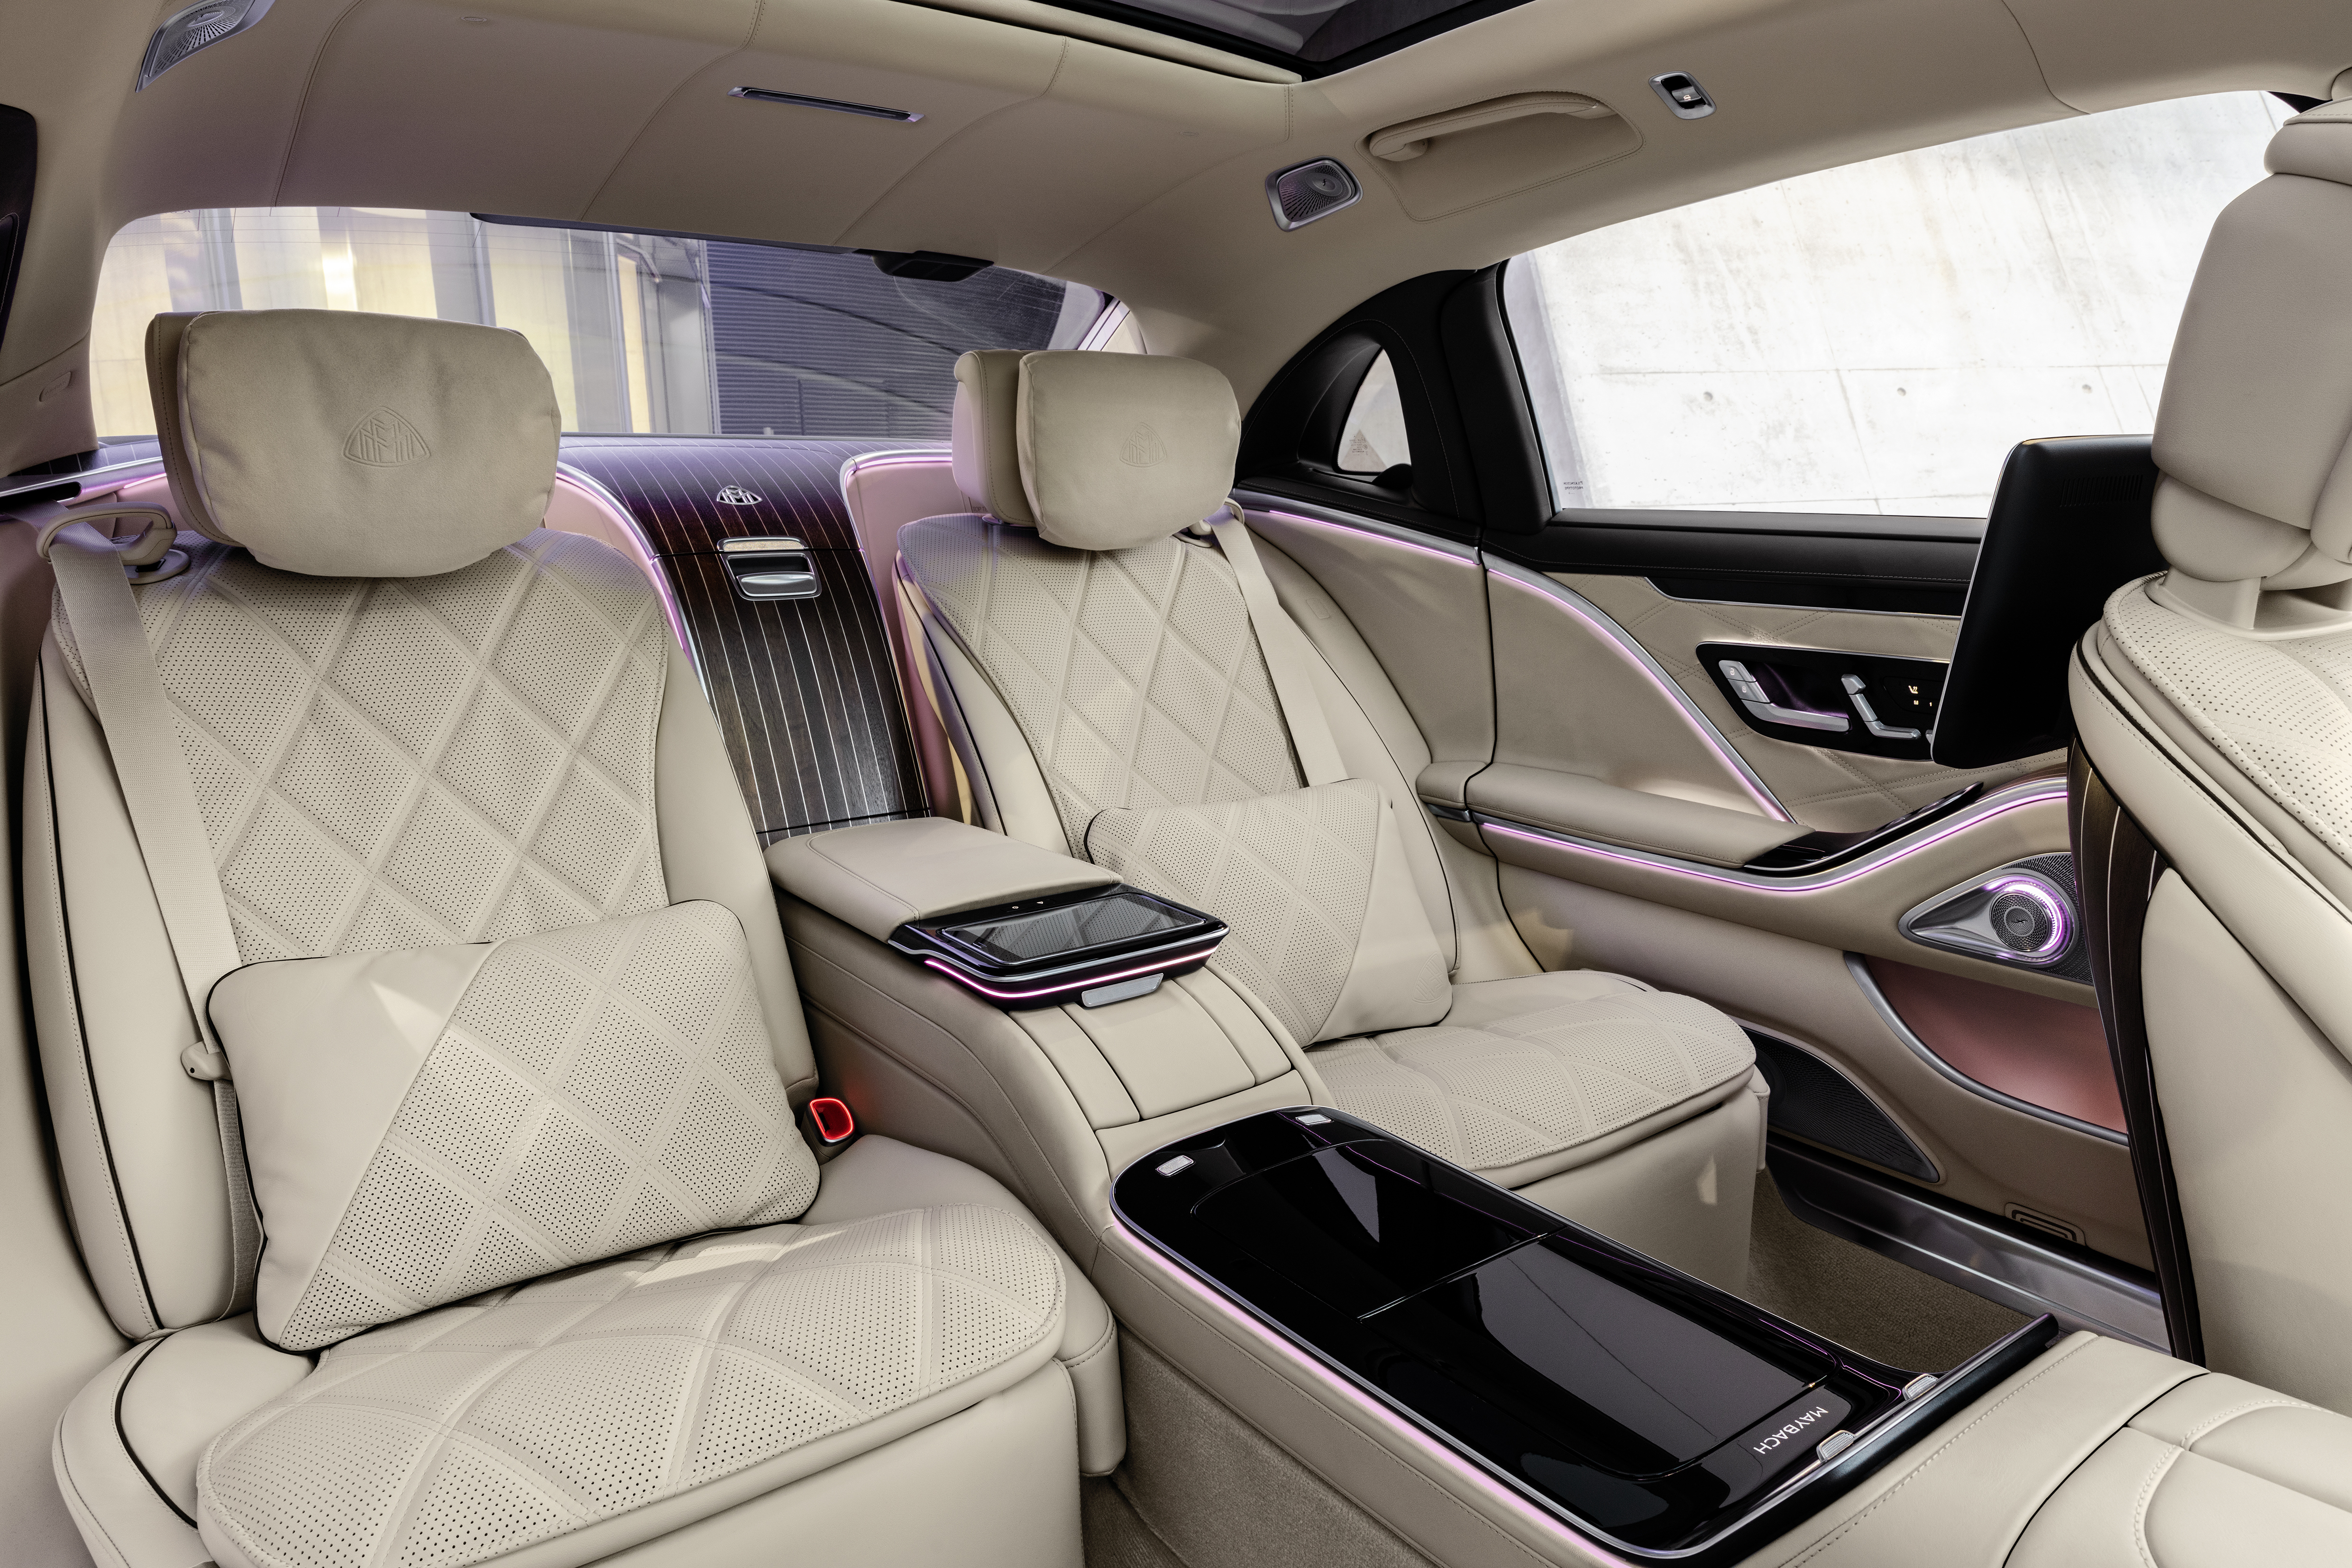 Mercedes Maybach S Class Unveiled Shows Why It Is The